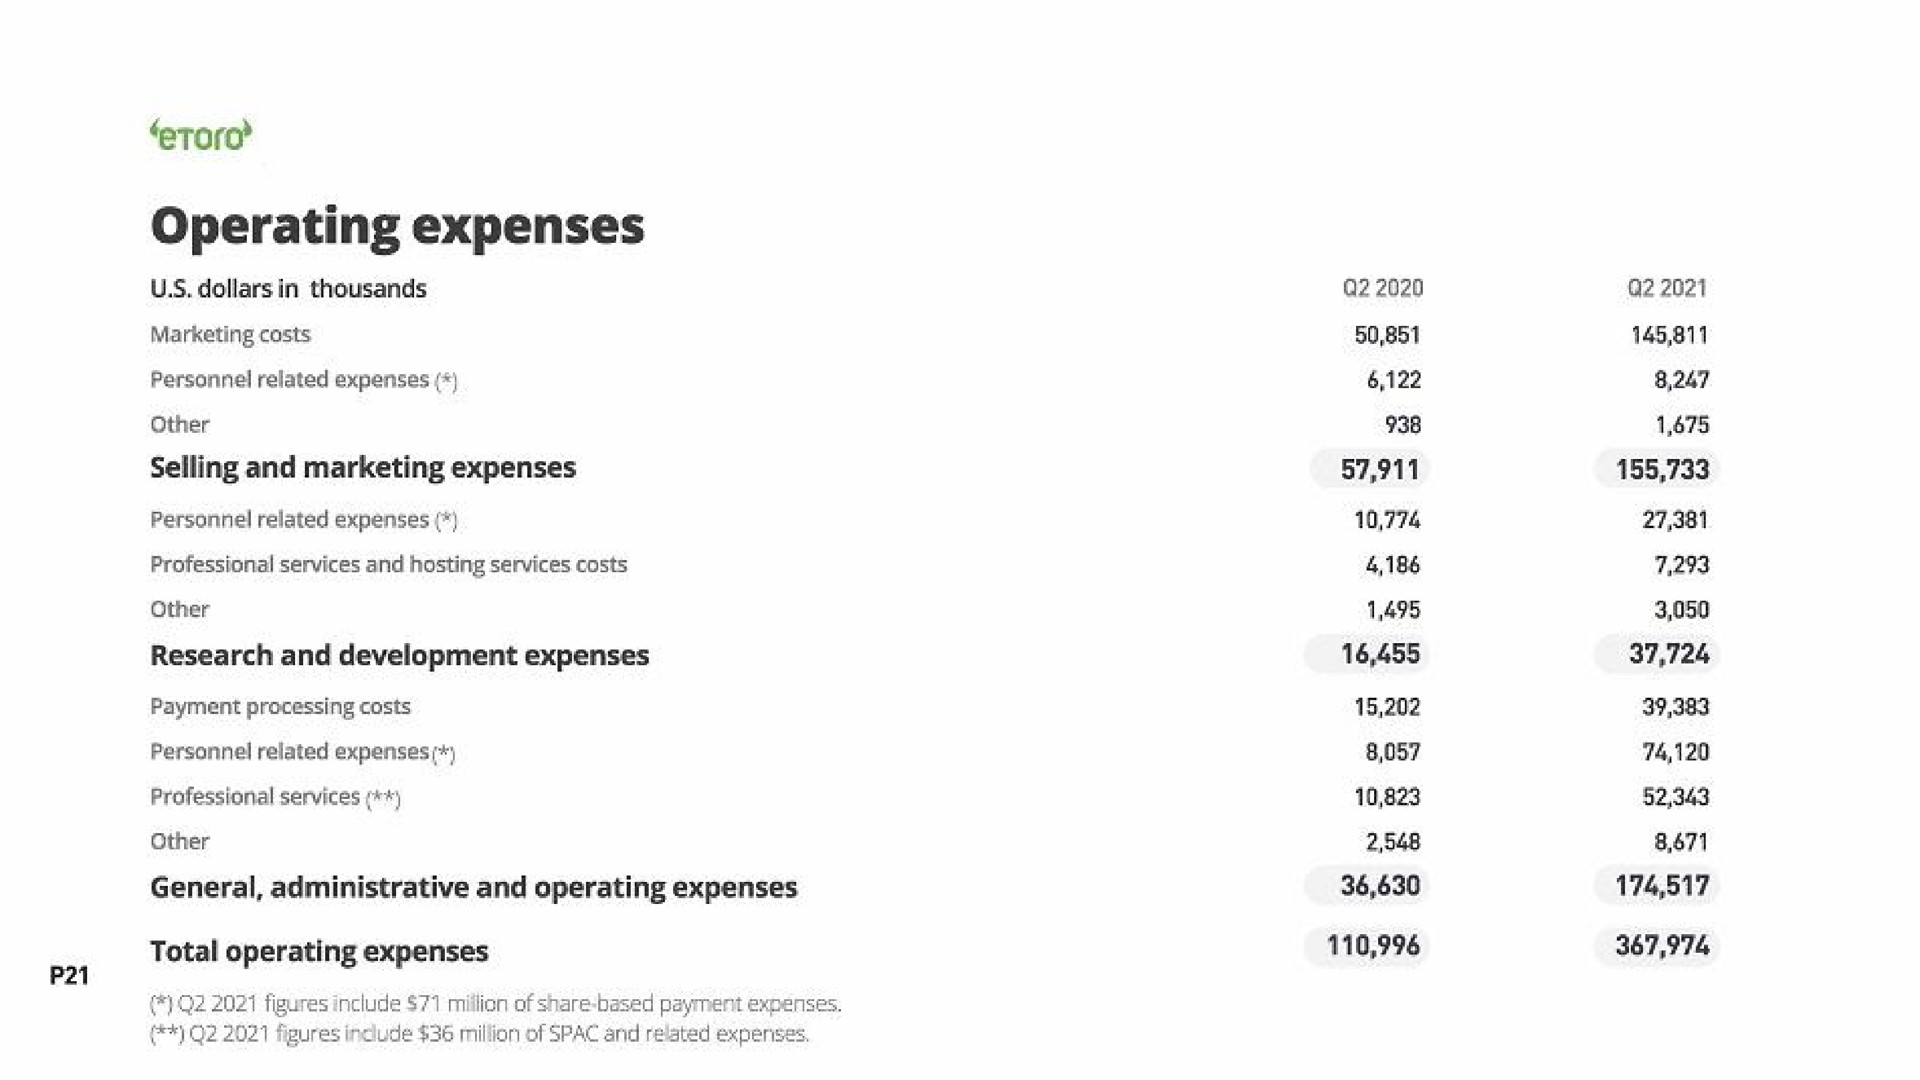 operating expenses selling and marketing expenses total operating expenses | eToro